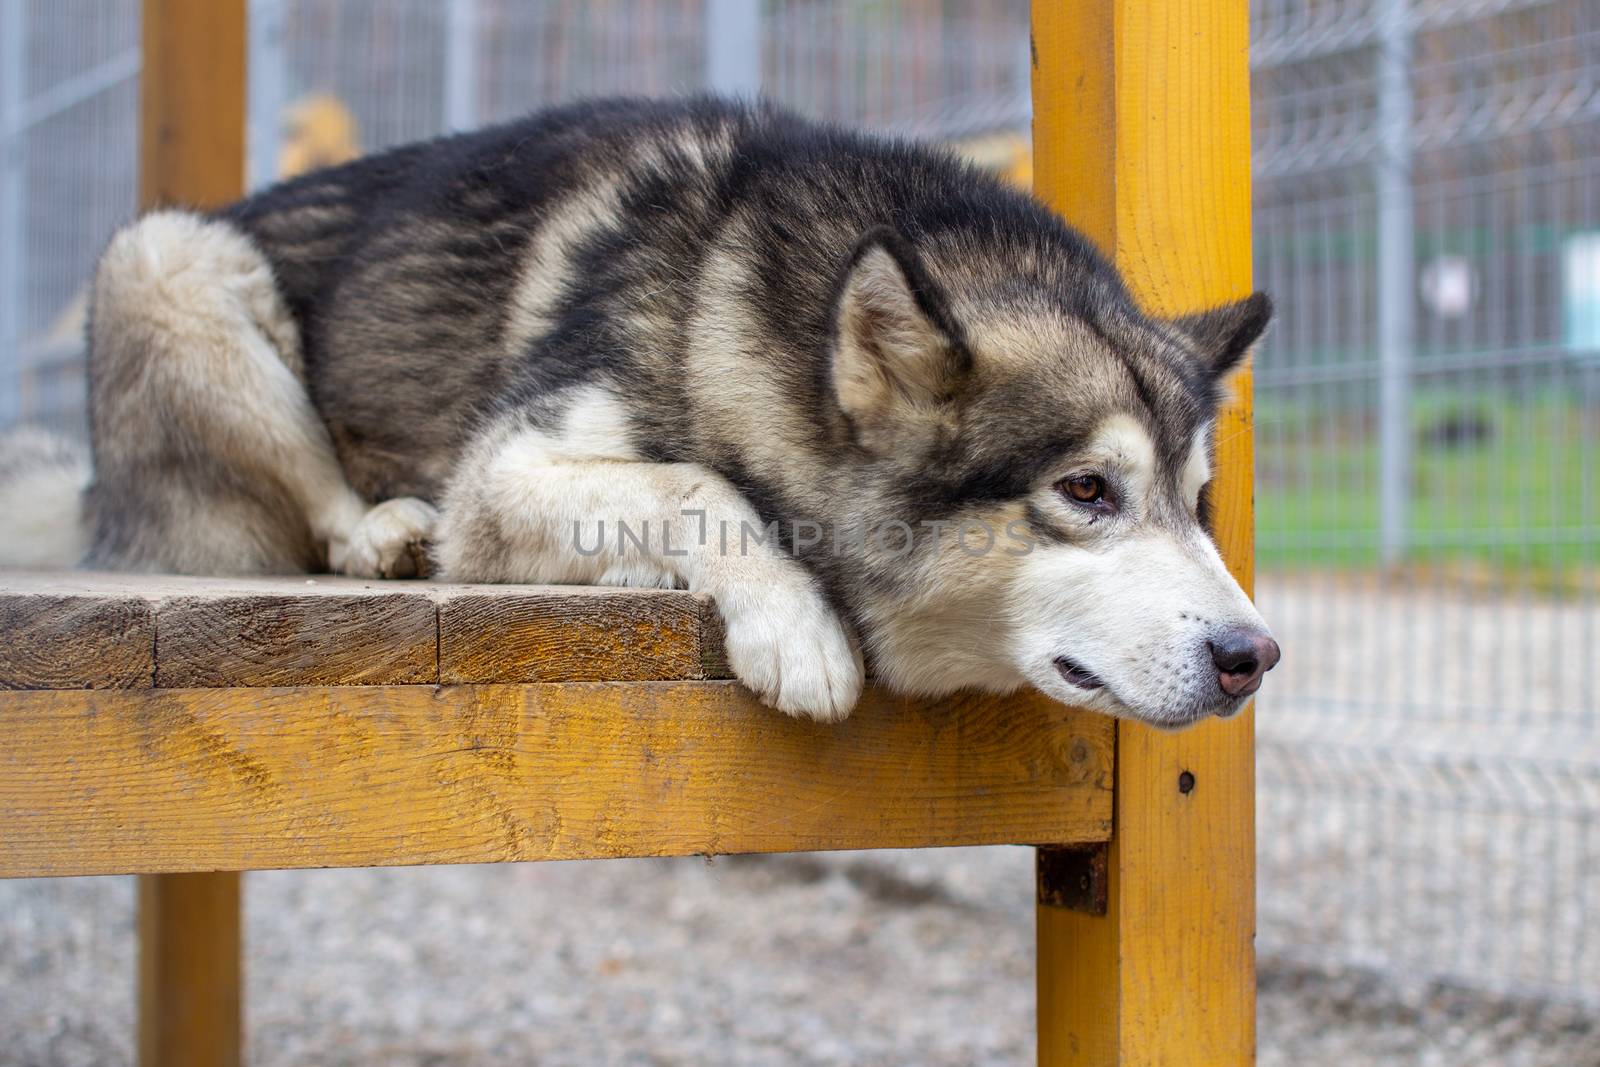 A beautiful and kind Alaskan Malamute shepherd sits in an enclosure behind bars and looks with intelligent eyes. Indoor aviary.